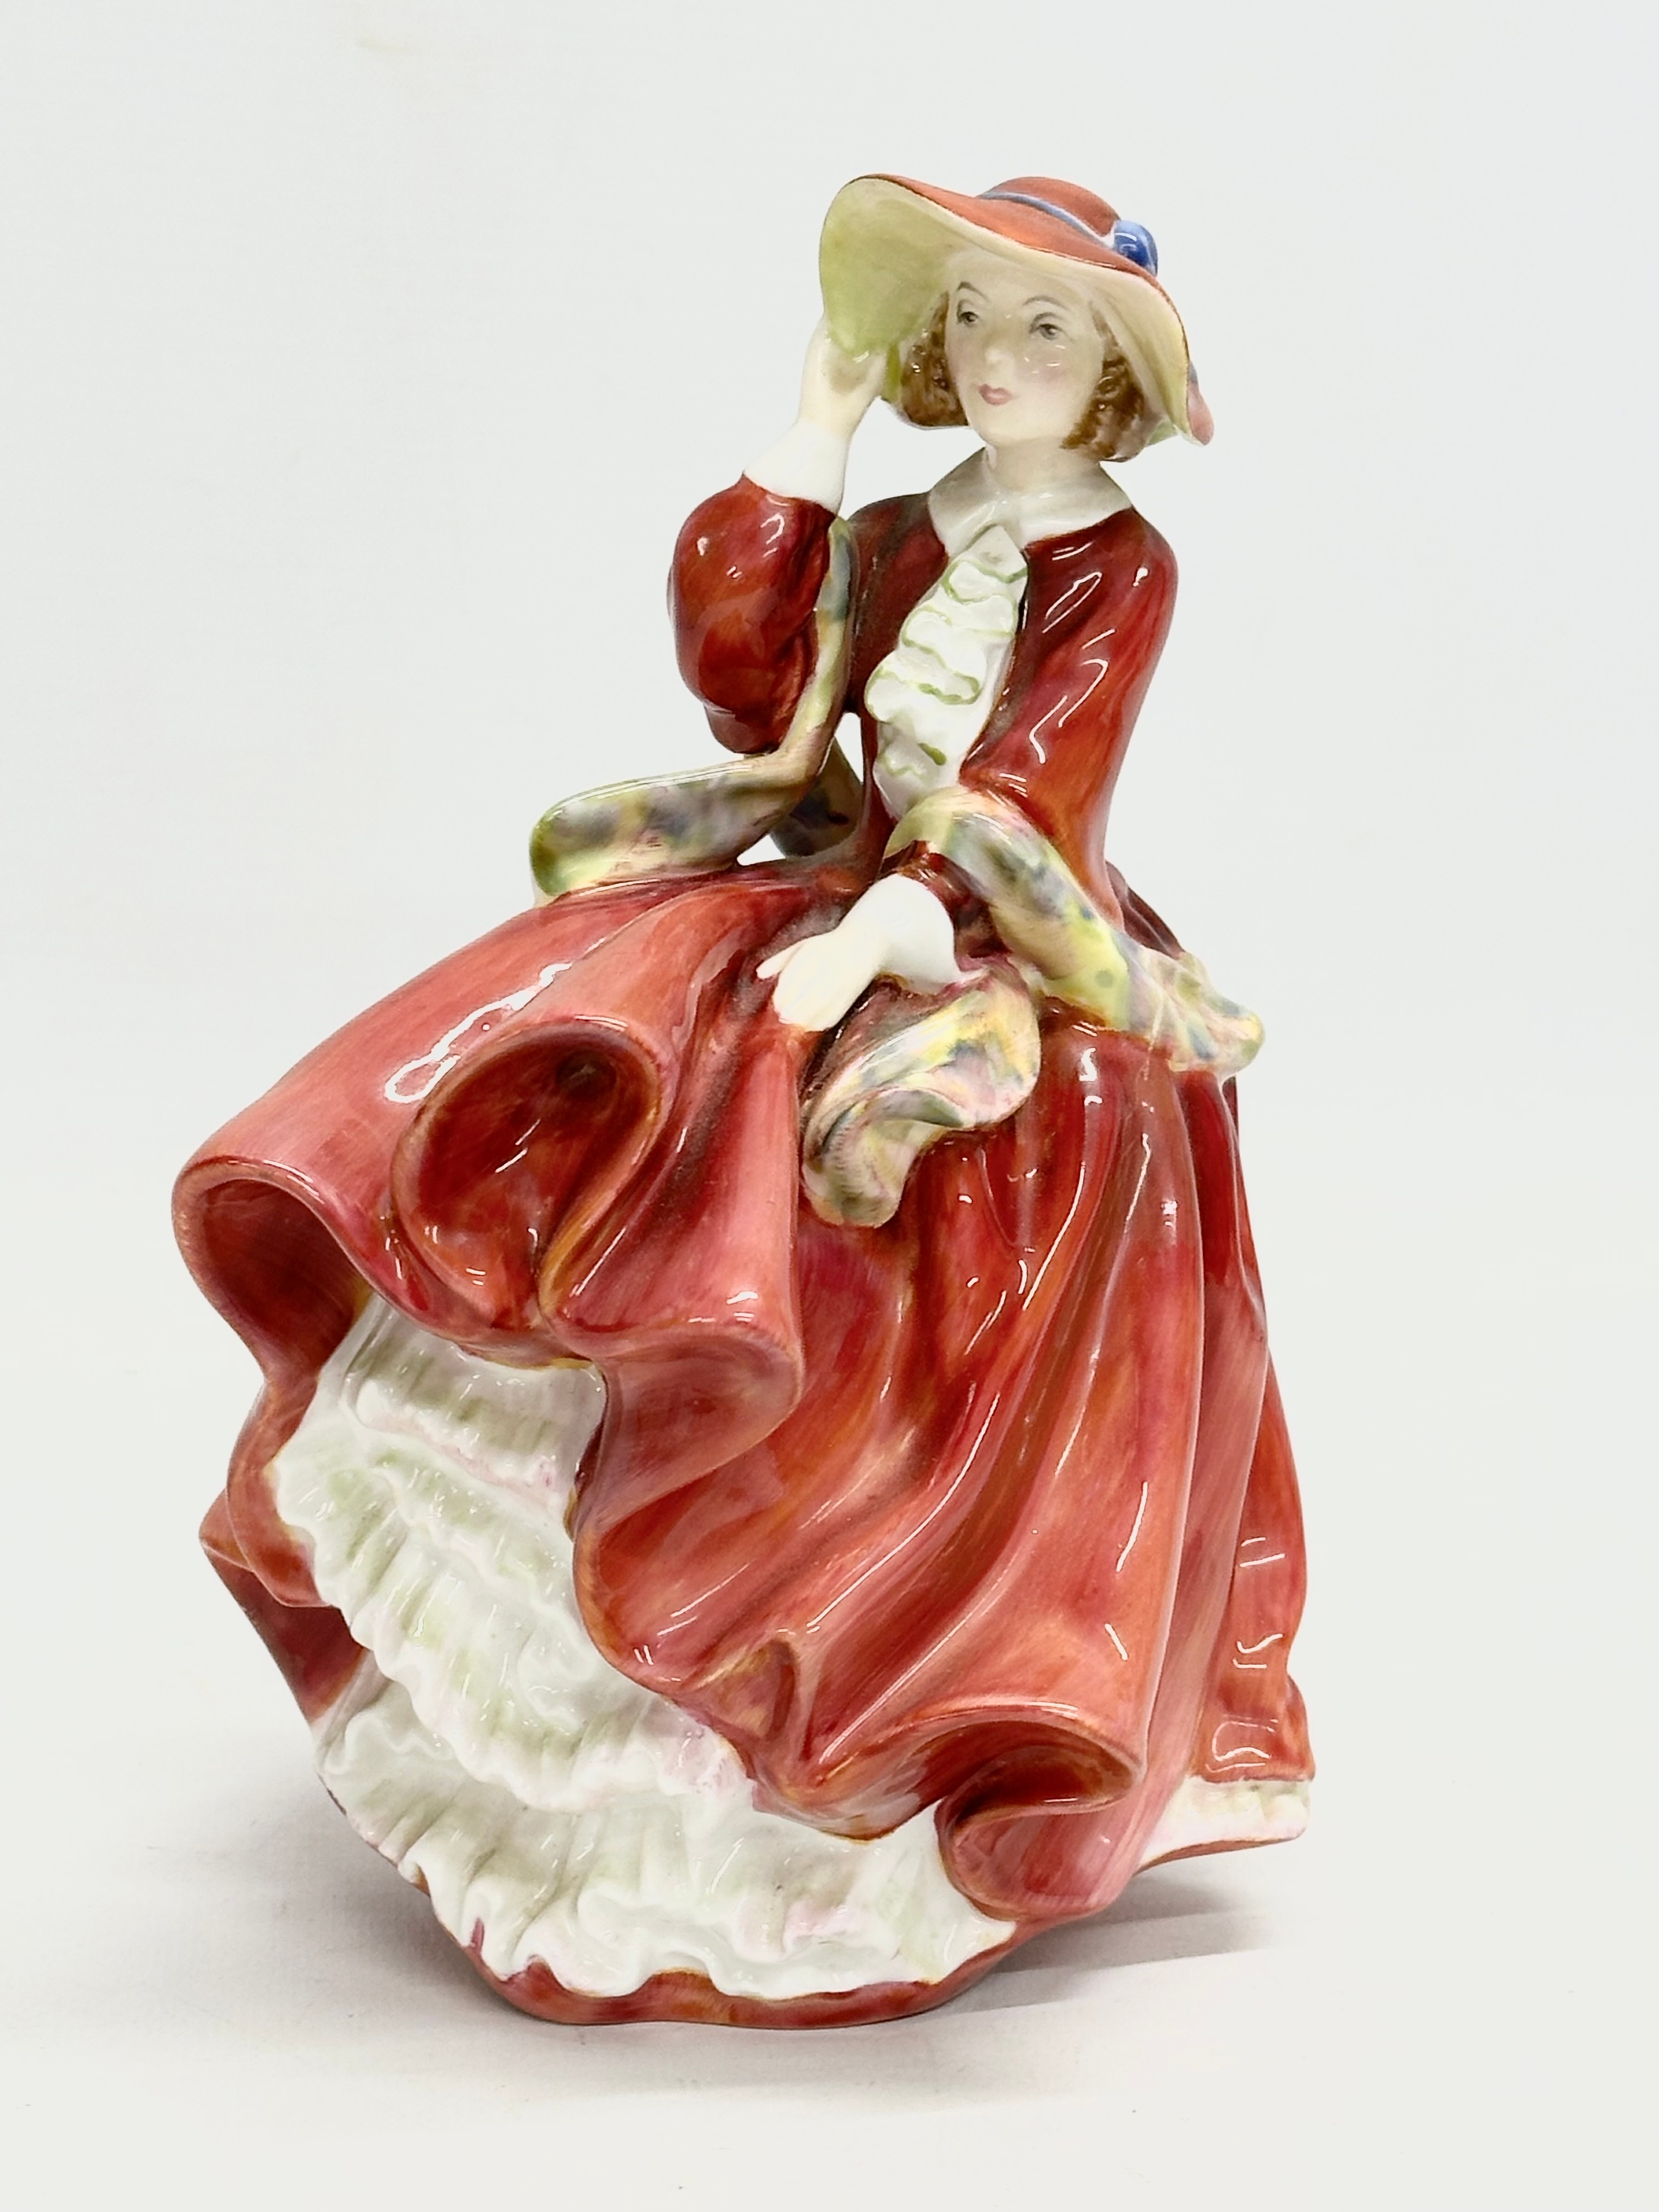 4 Royal Doulton figurines. Her Ladyship RN 842480. Top O’ The Hill, Denise, Pretty Ladies - Image 4 of 9